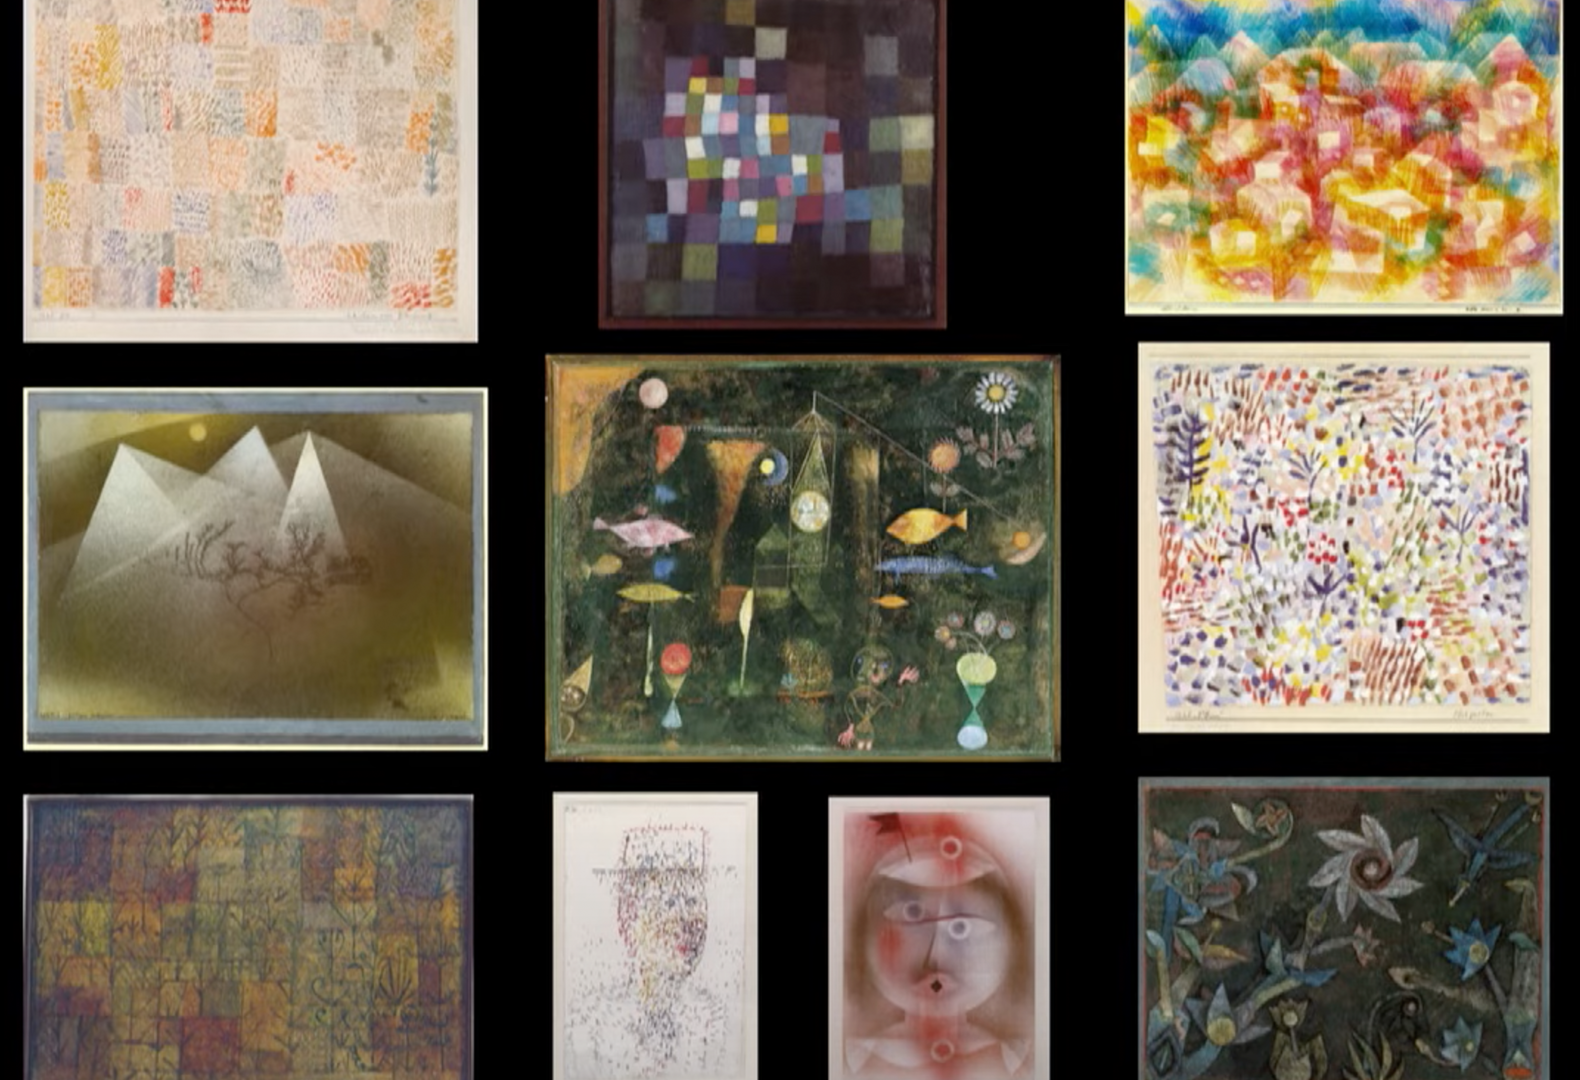  An array of Paul Klee's works from 1925 with a wide variety of styles.